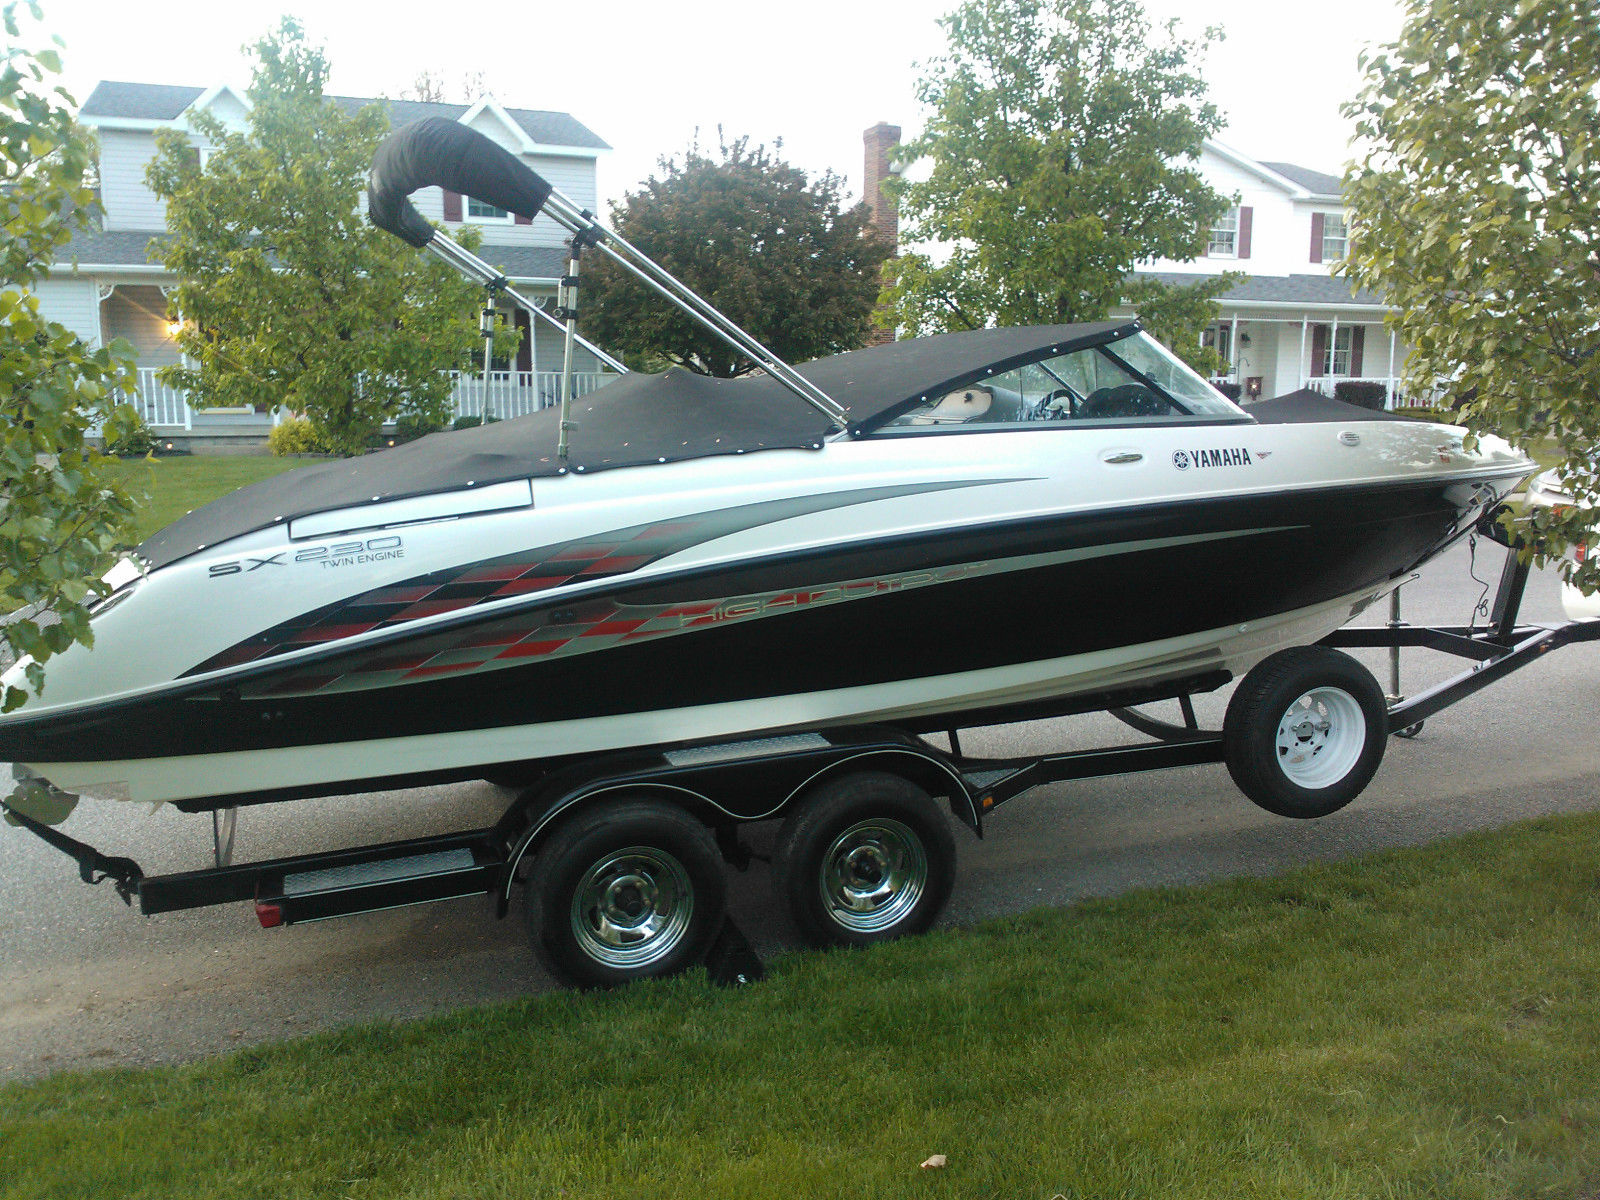 Yamaha SX230 2005 for sale for $153.